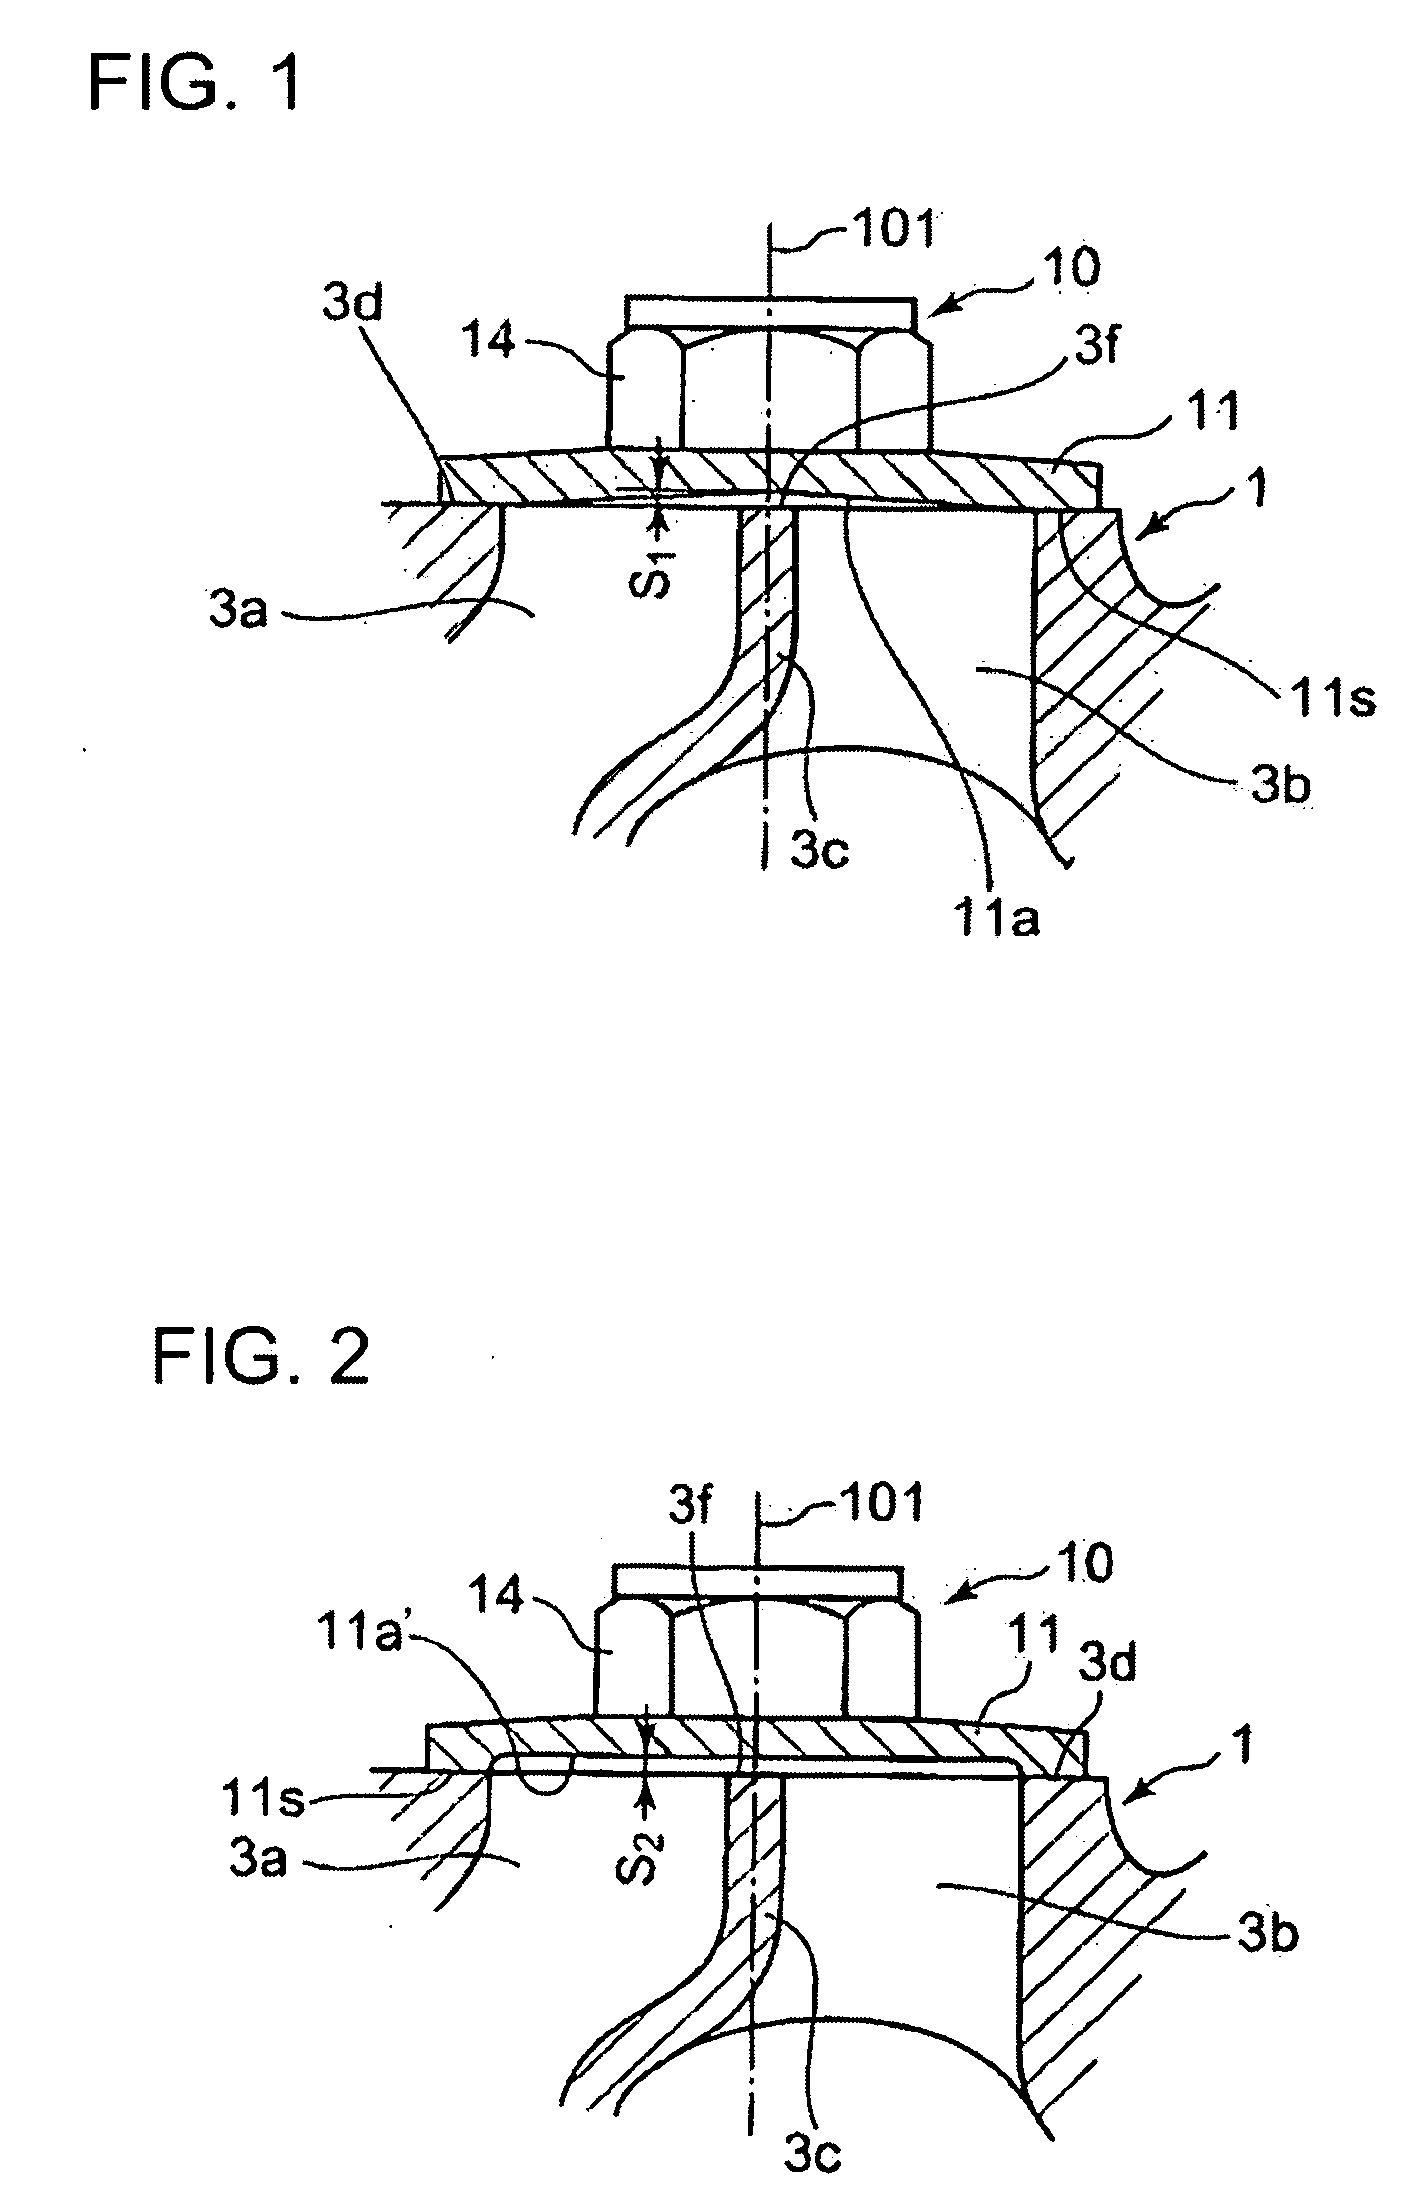 Structure of Exhaust Turbocharger Having Waste Gate Valve